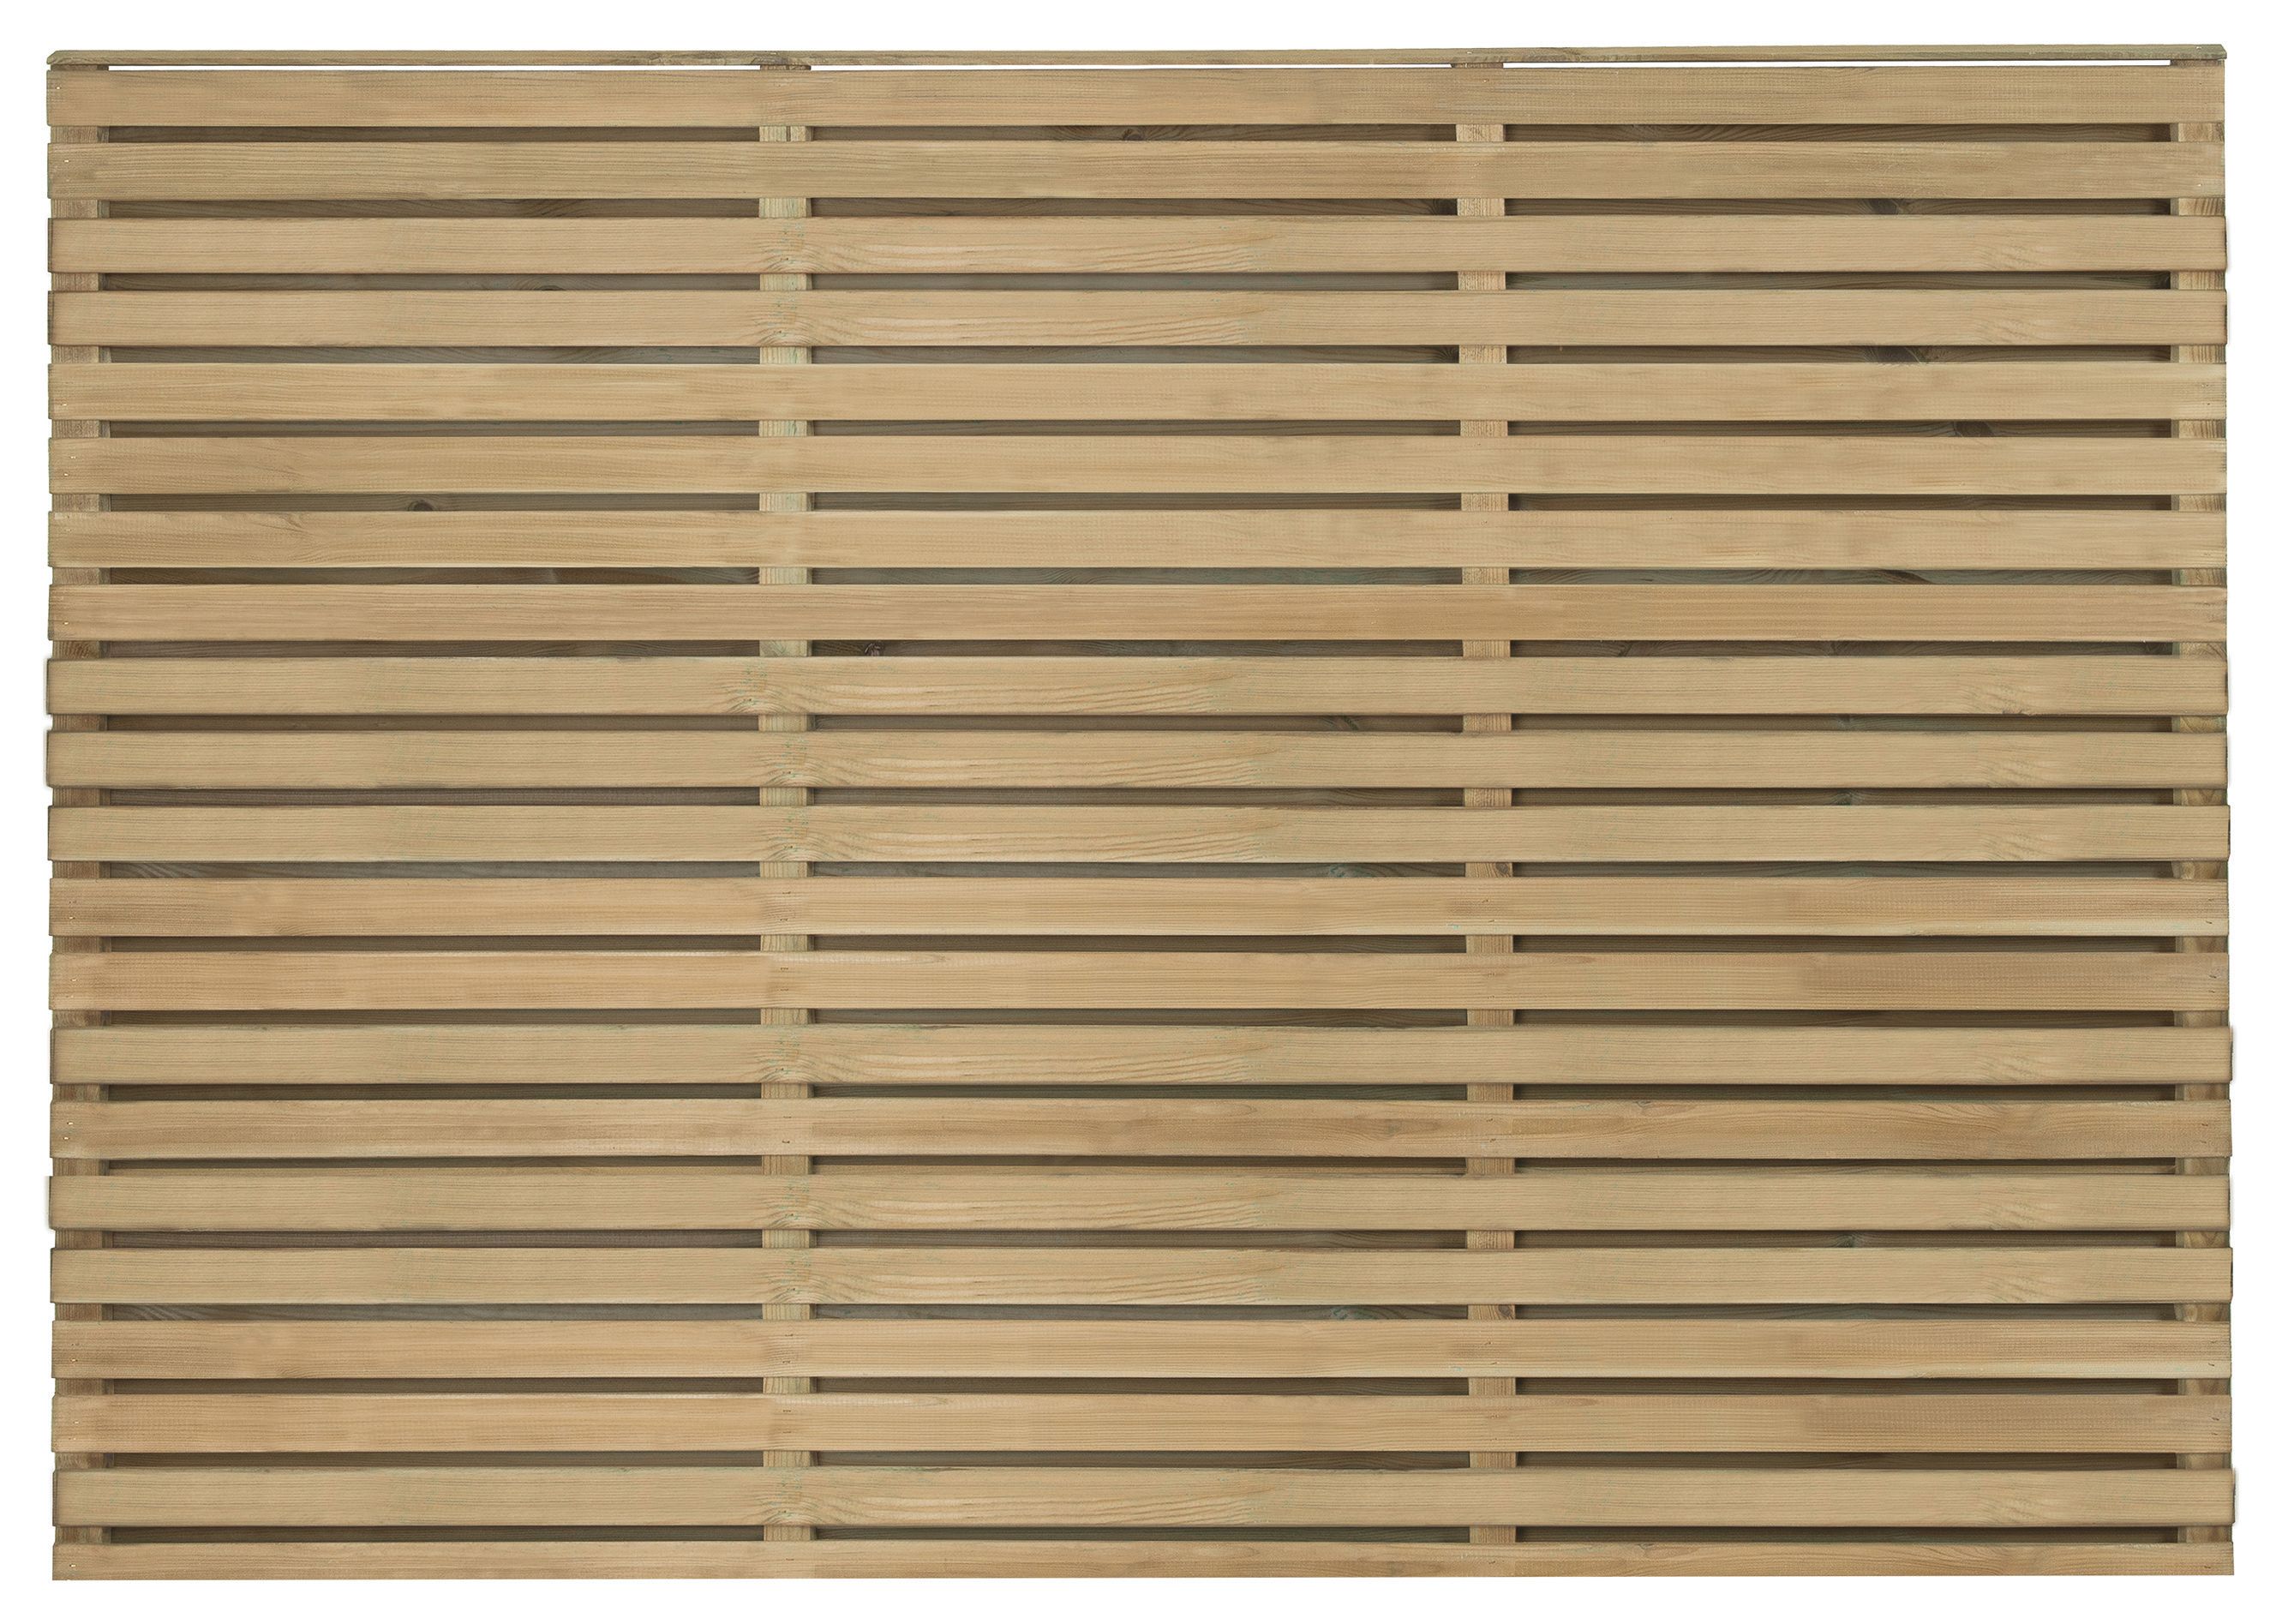 Image of Forest Garden Double Slatted Fence Panel - 1800 x 1200mm - 6 x 4ft - Pack of 4